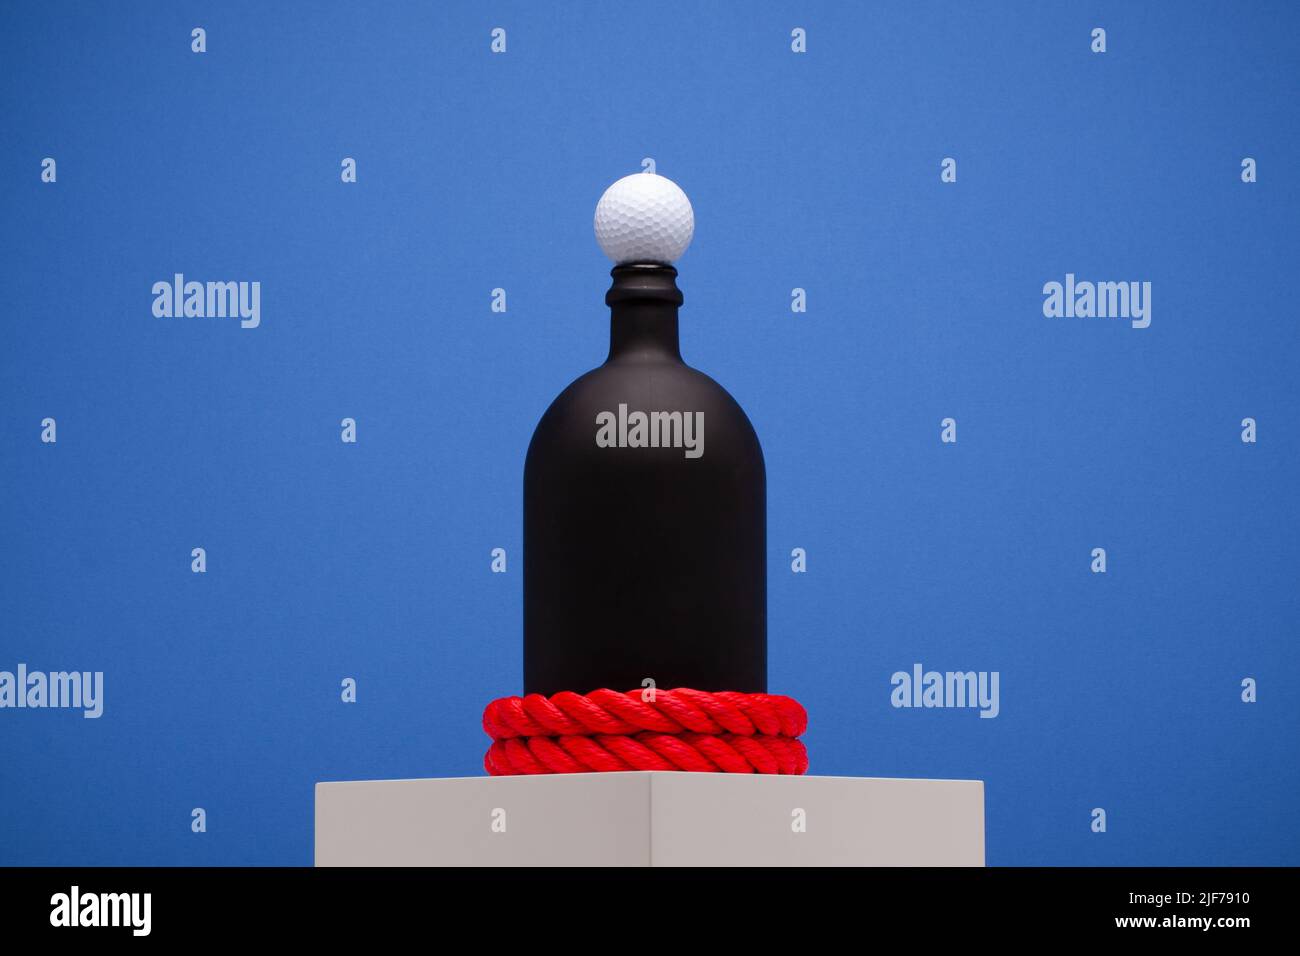 Golf ball on mouth of black bottle on the blue background. Creative photography. Stock Photo